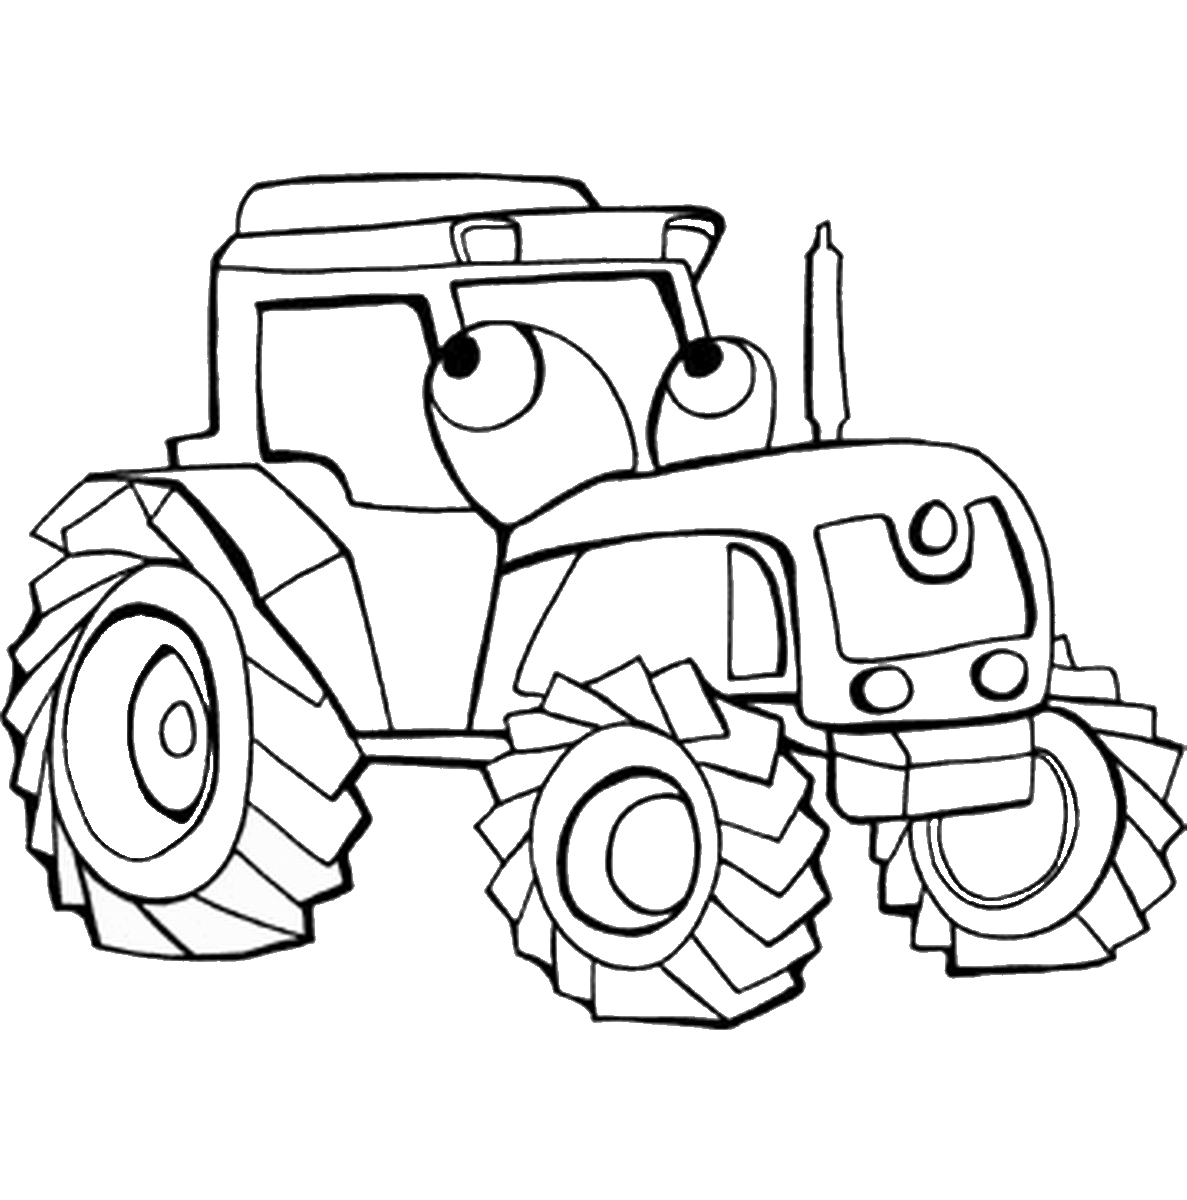 John Deere Tractor Coloring Pages for boys Printable 2020 0498 Coloring4free